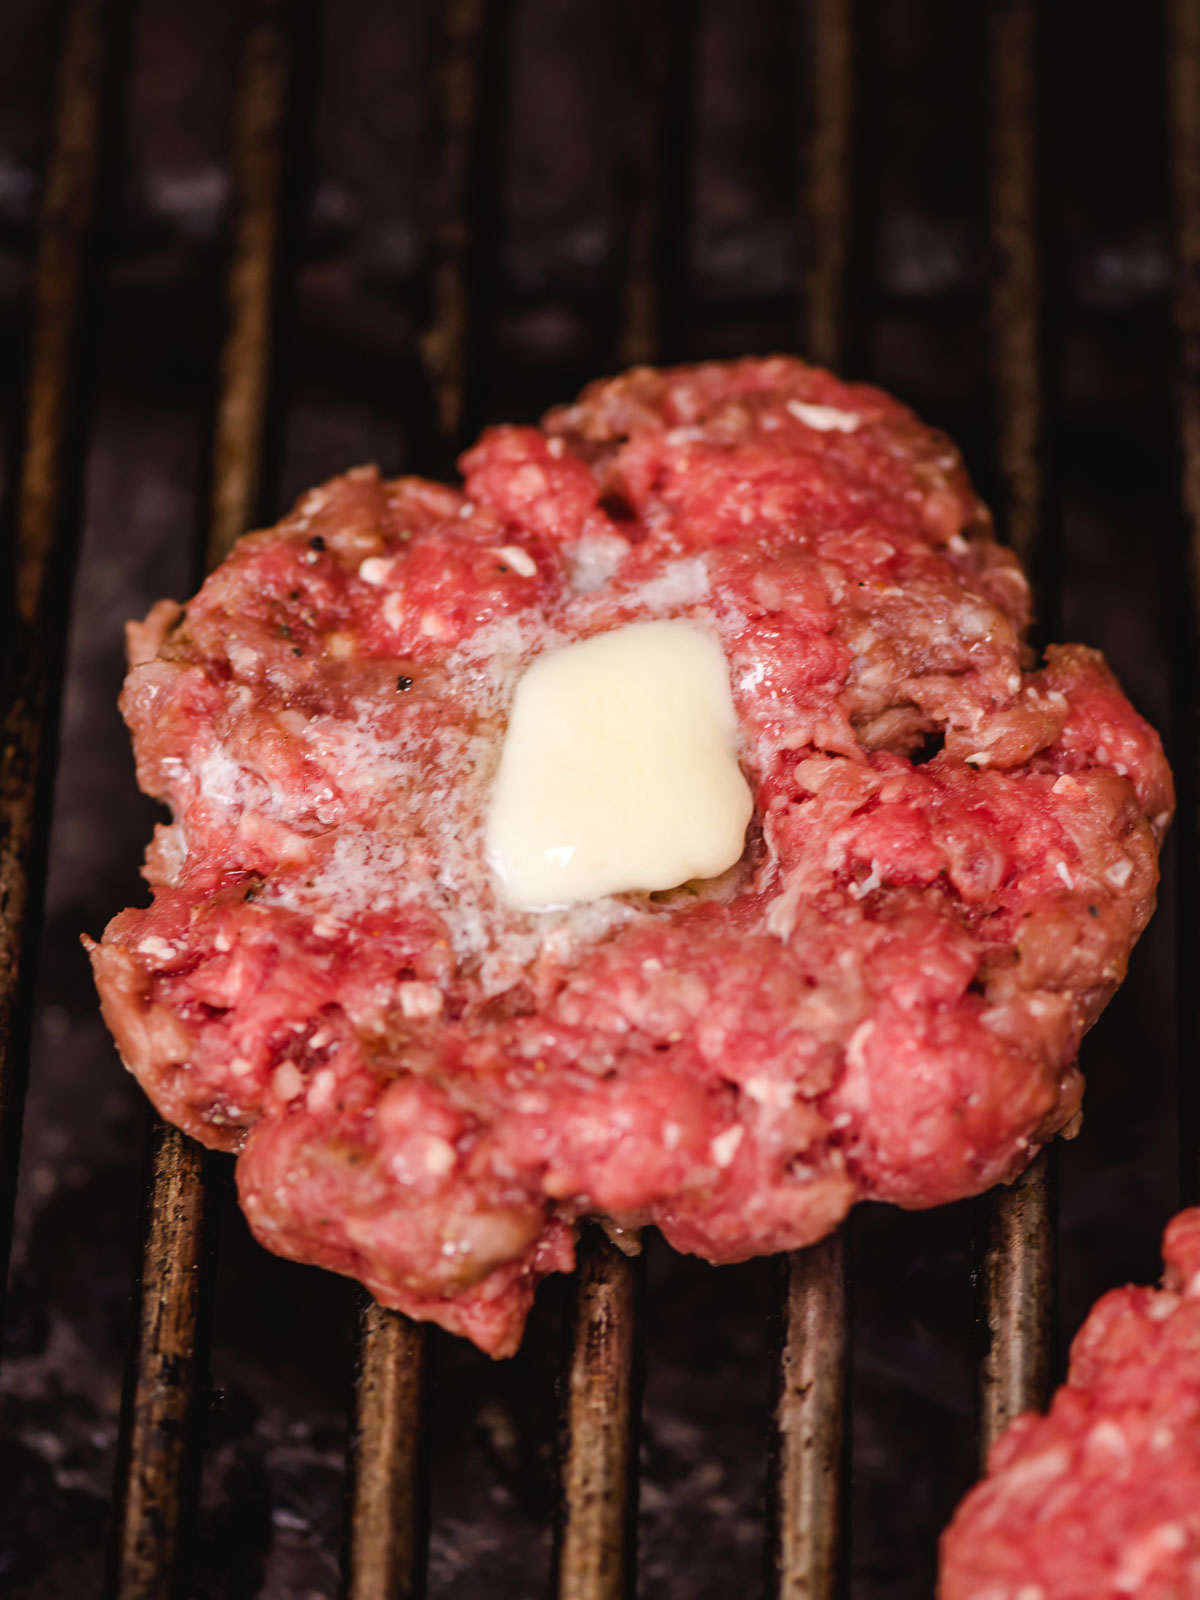 Burger patty shown on a grill with a pat of butter melting on top.